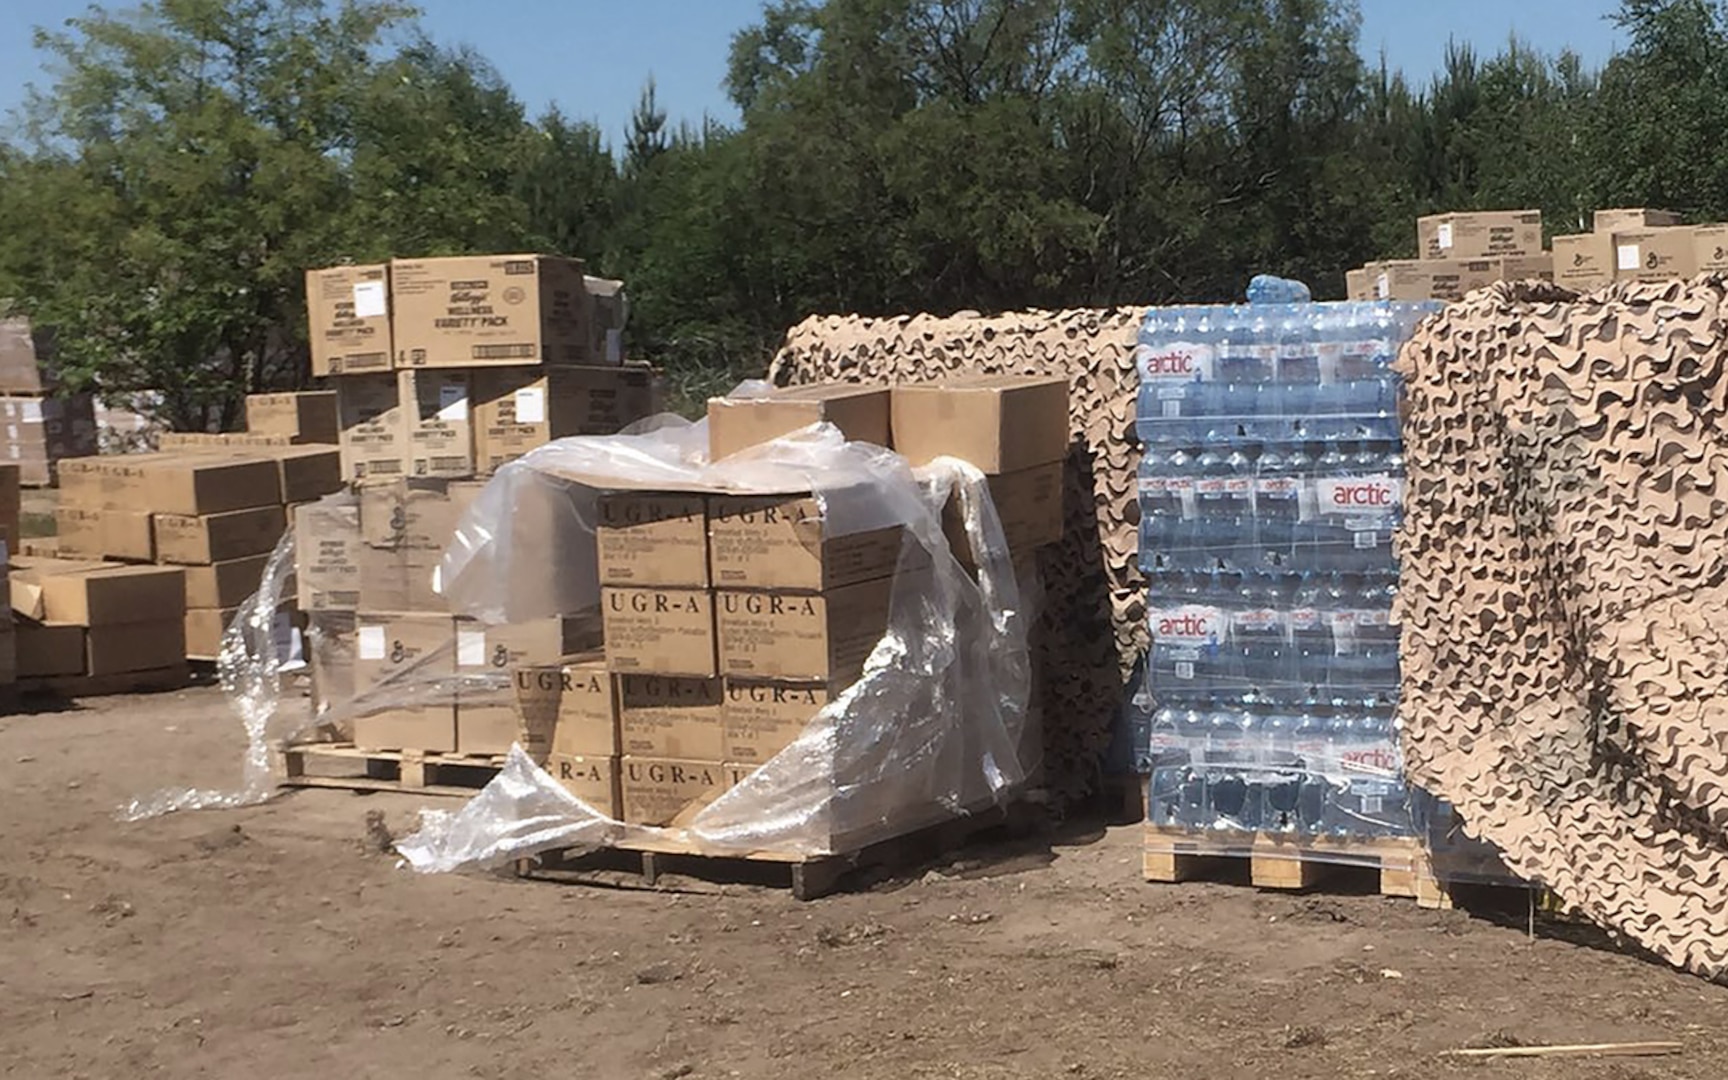 Part of the 1,484 pallet shipment of water vendors delivered to Torun, Poland, during the exercise.